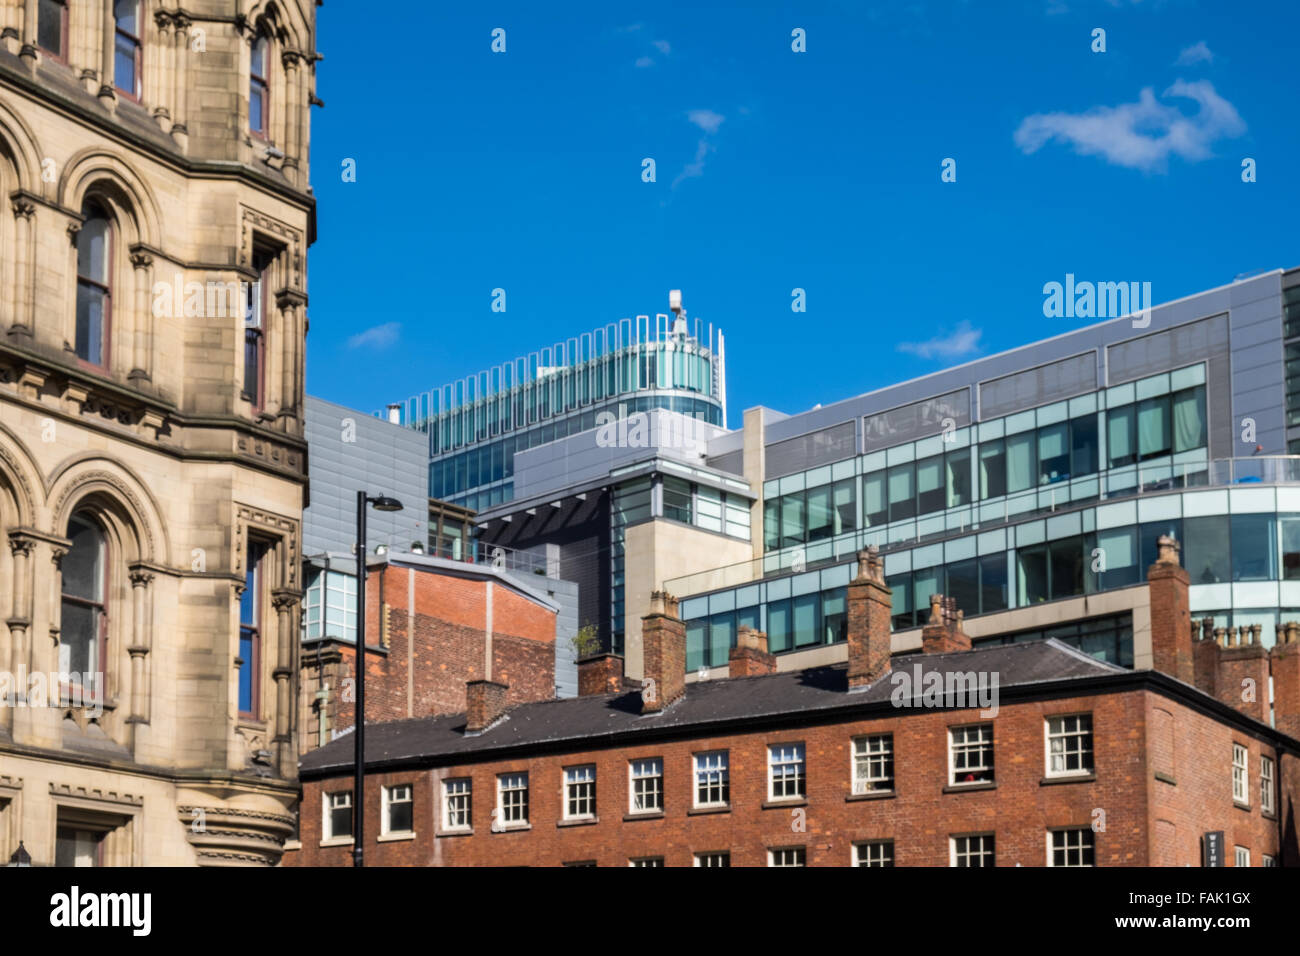 Contrasts in Architecture in Manchester City Centre, Manchester, UK. Stock Photo